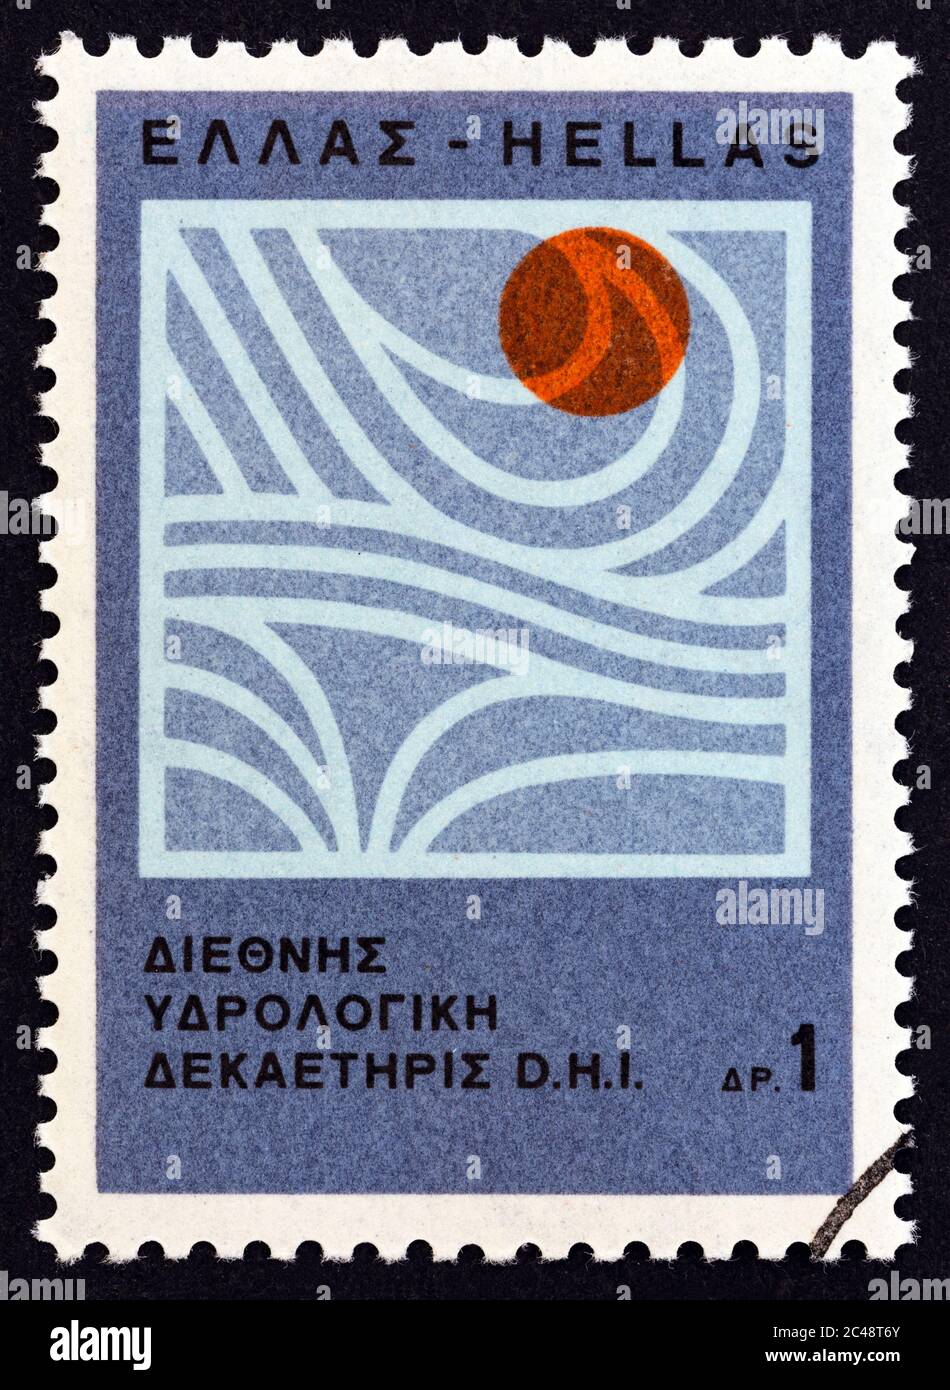 GREECE - CIRCA 1966: A stamp printed in Greece issued for the Decade of World Hydrology shows Movement of Water, circa 1966. Stock Photo